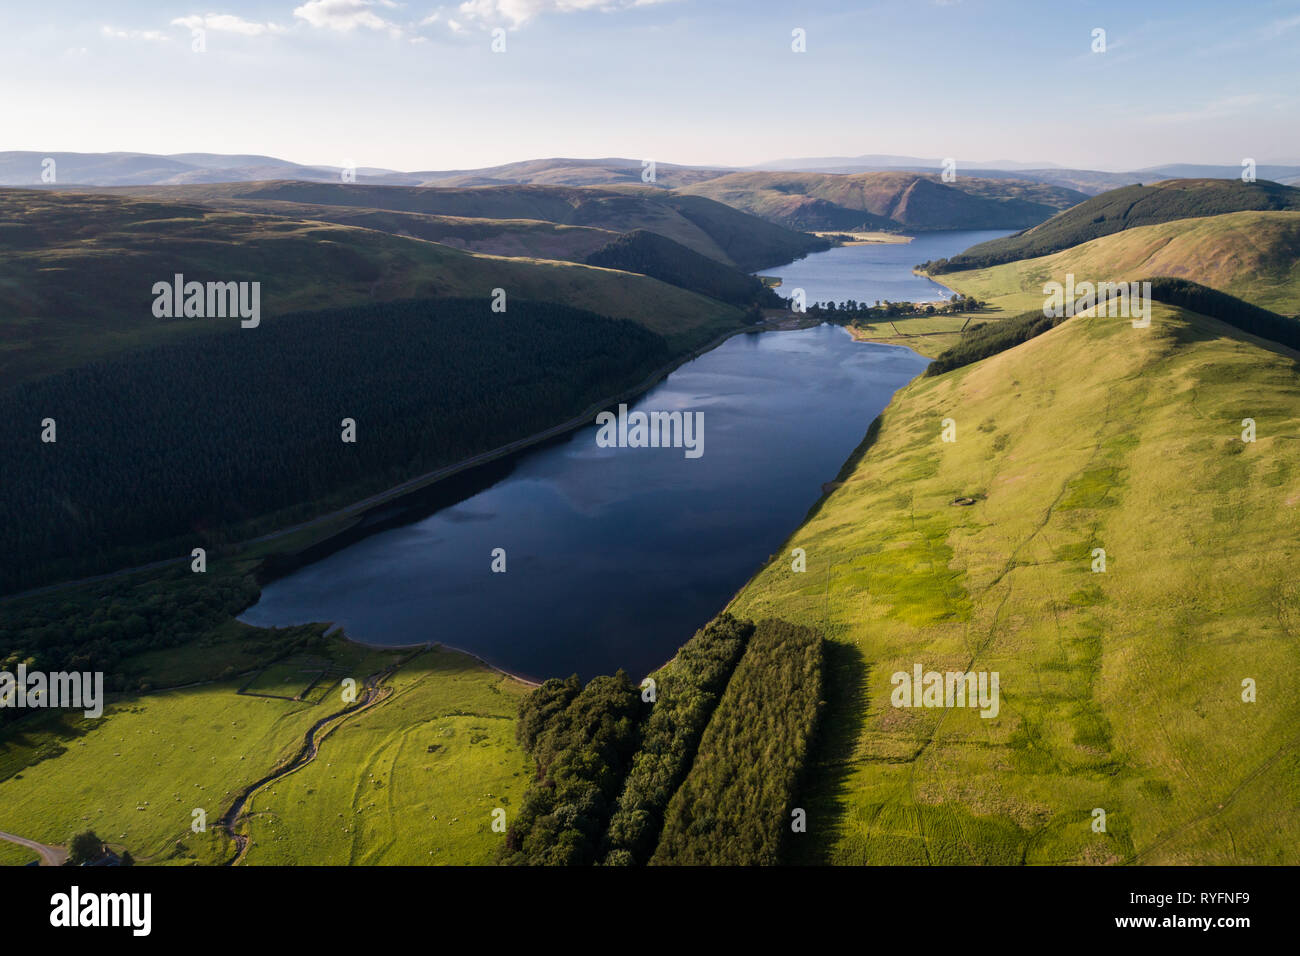 Aerial image of St Mary's Loch and Loch of the Lowes showing surrounding hills from a high vantage point. Stock Photo